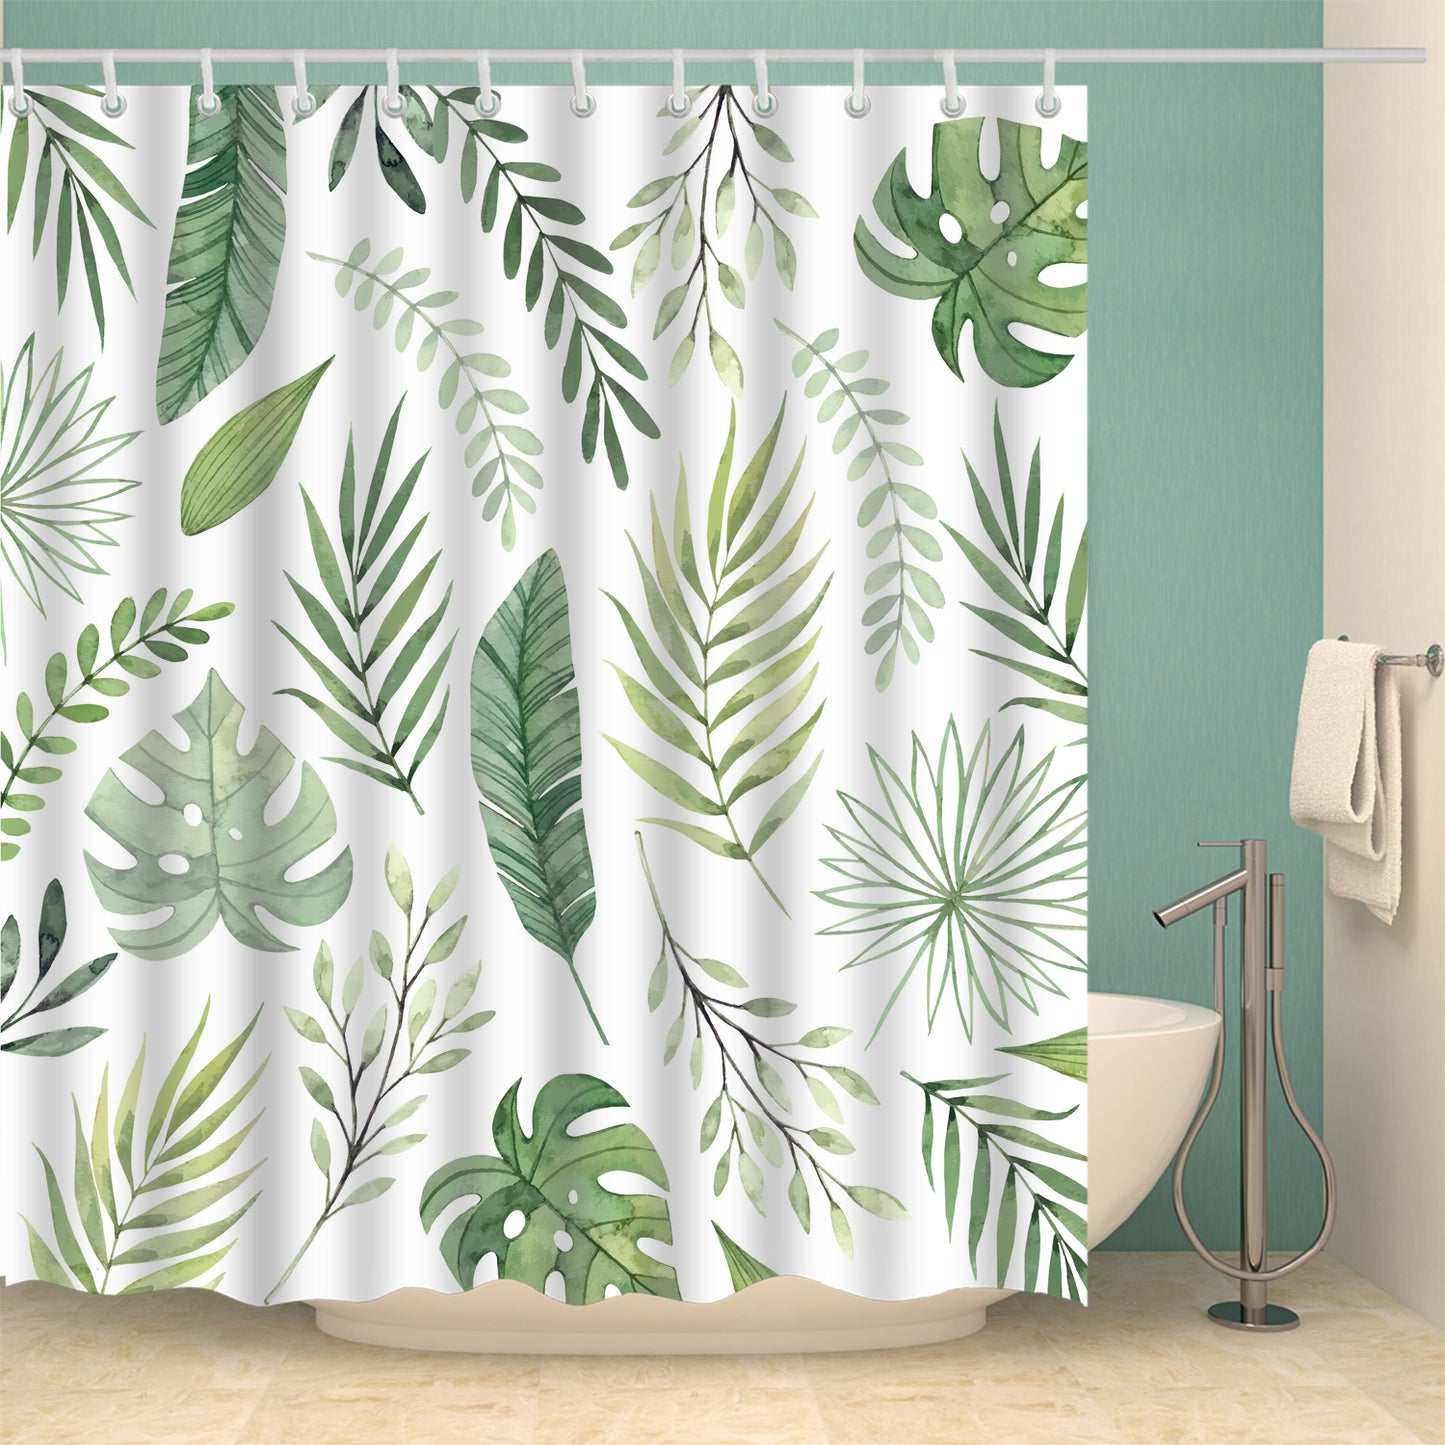 Summer Tropical Seamless Green Palm Floral Leaves Shower Curtain